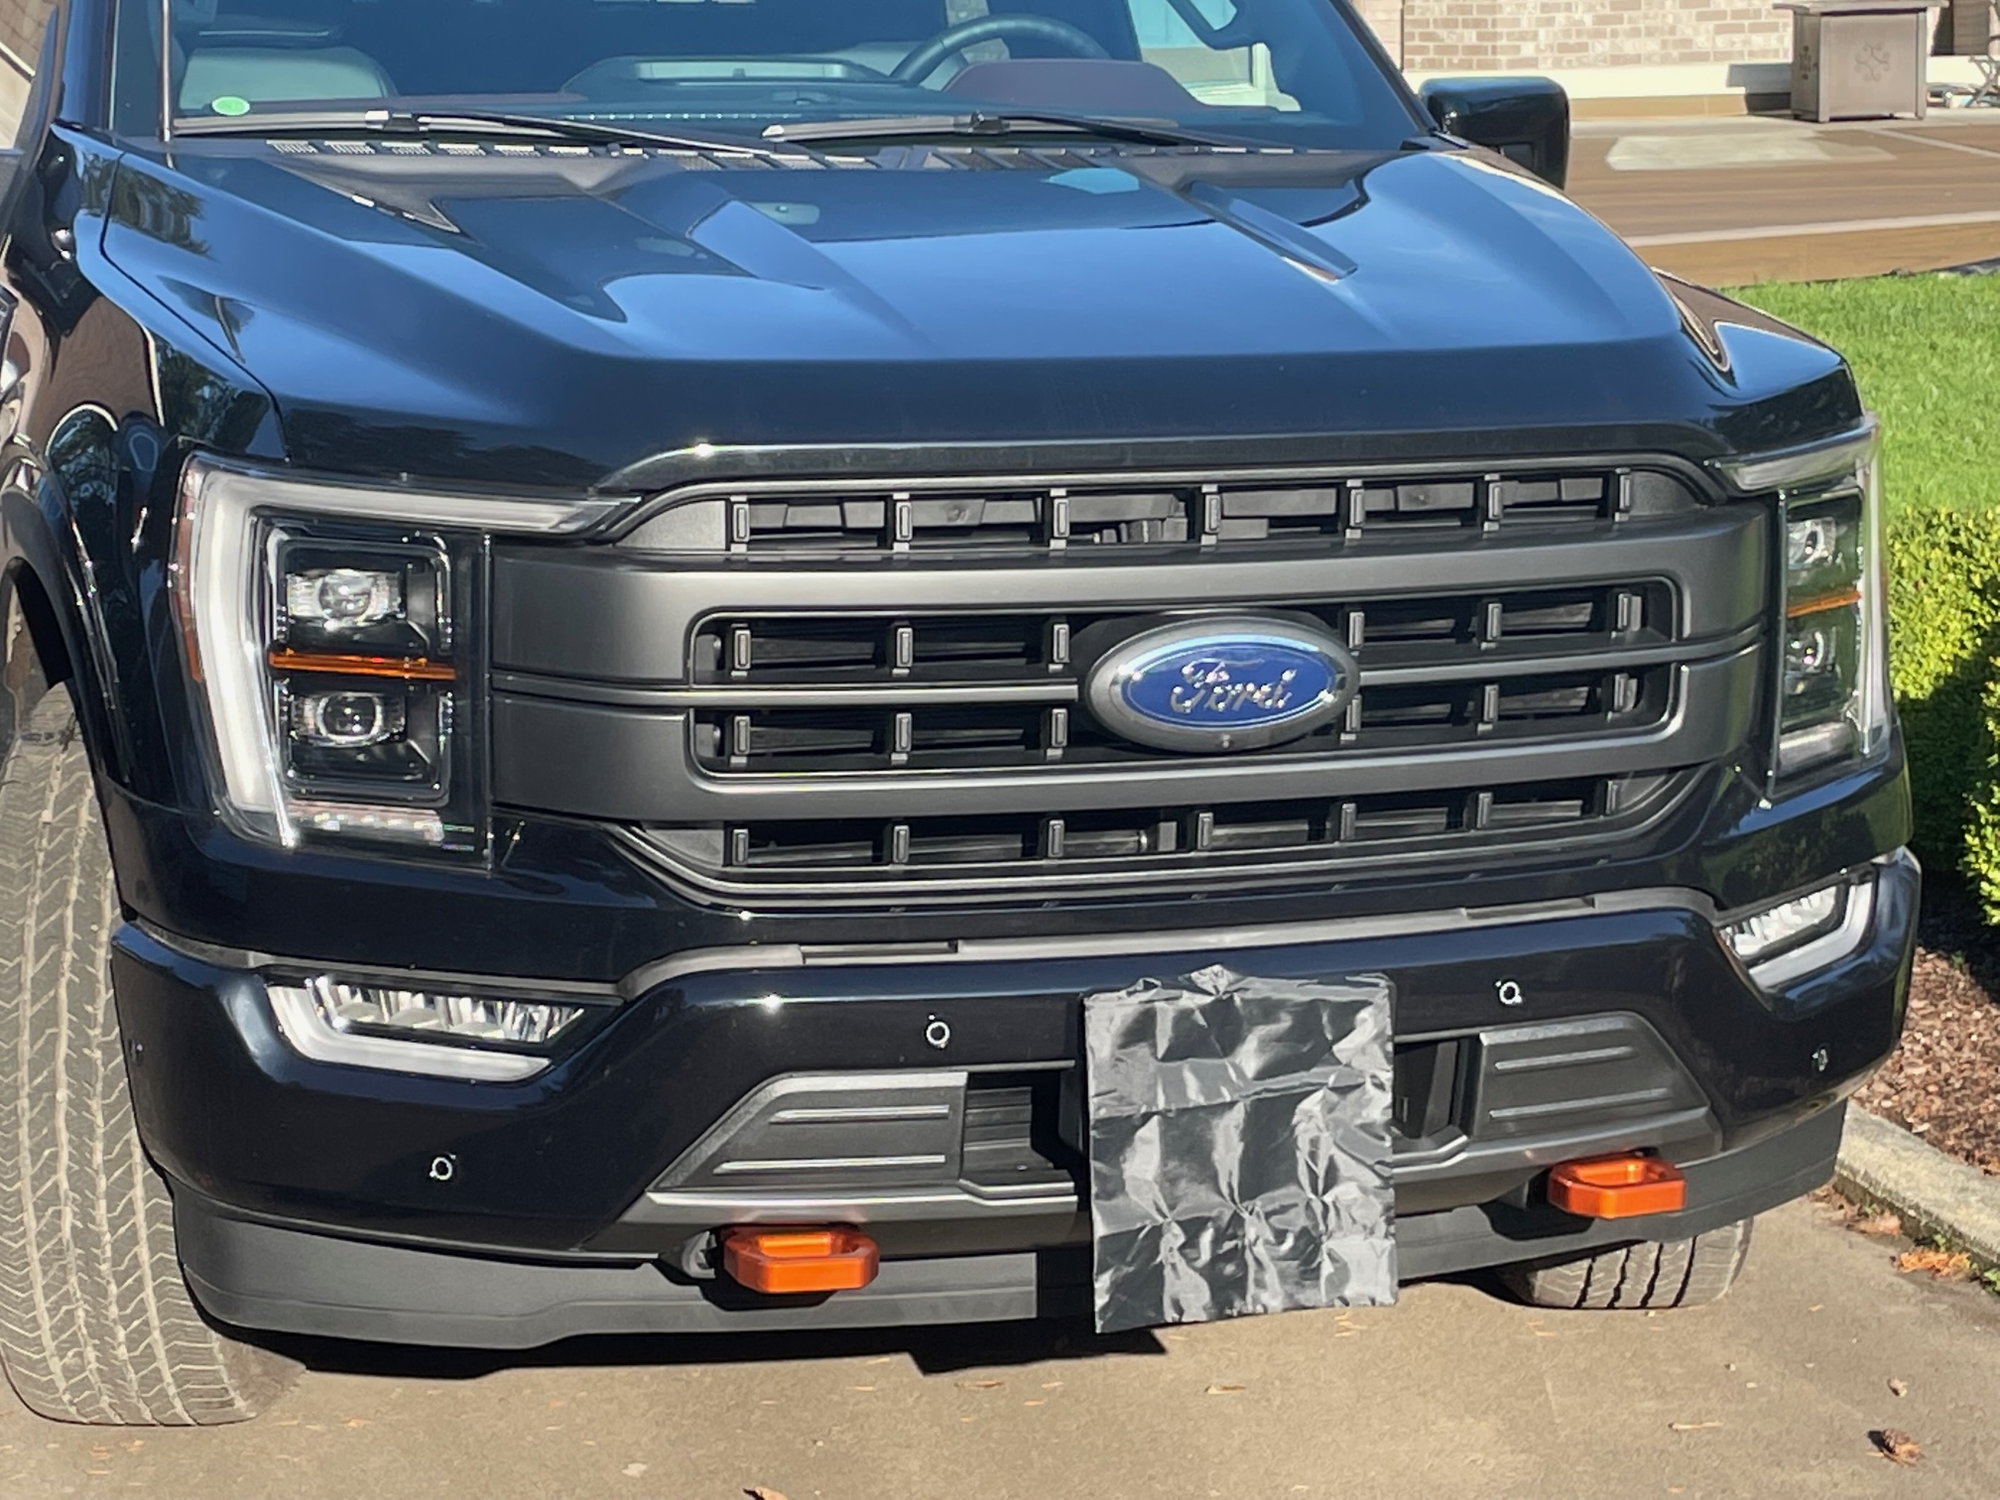 Add OEM tow hooks to 21 XLT - Ford F150 Forum - Community of Ford